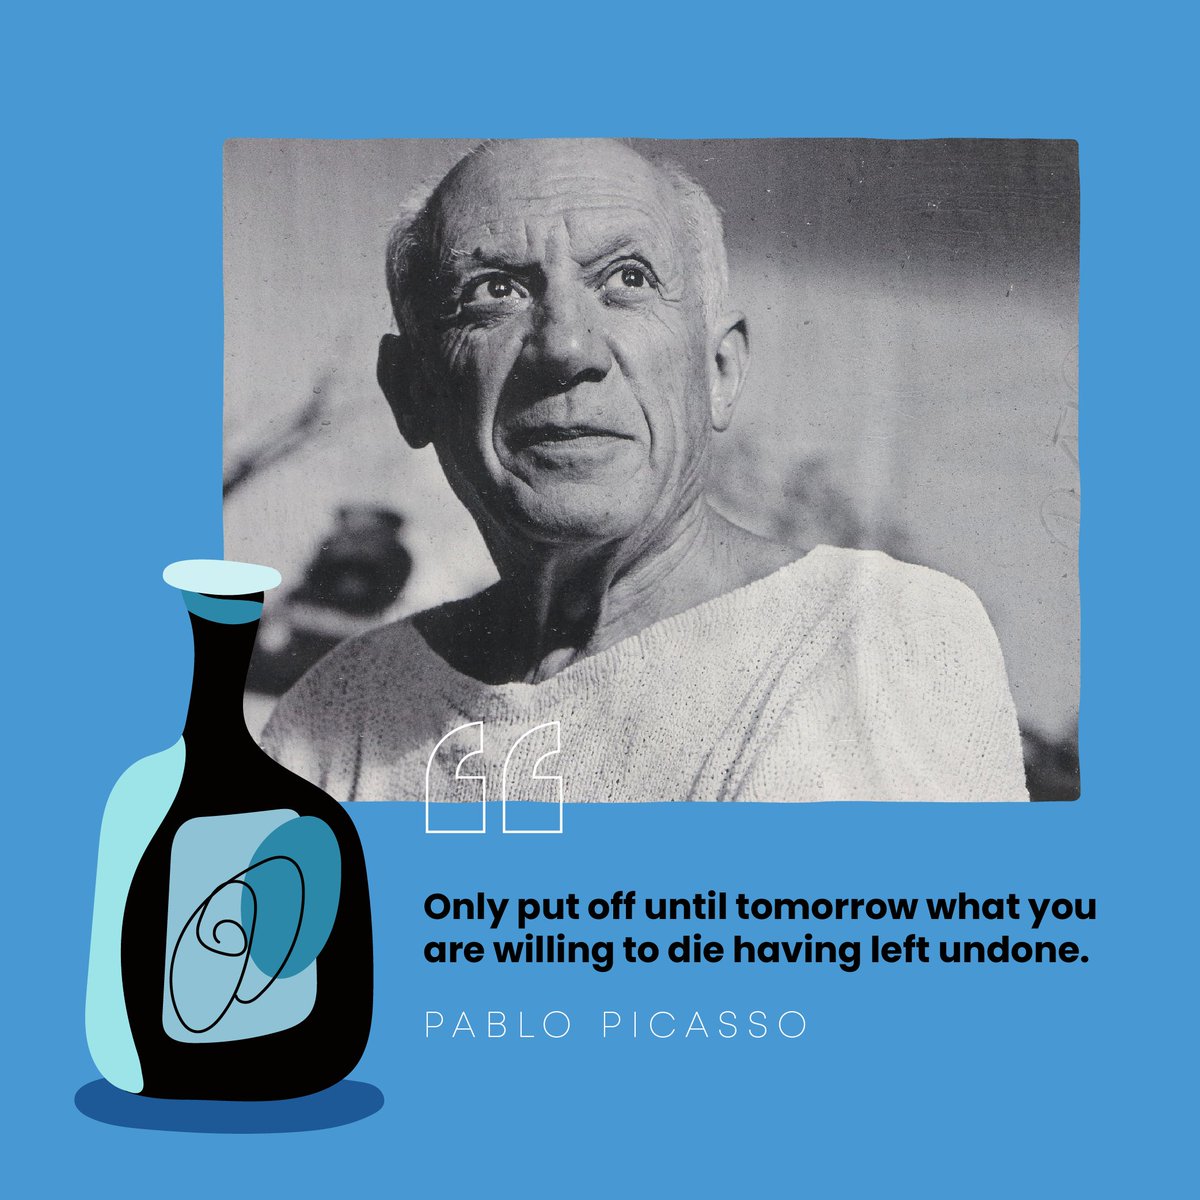 Don't wait another moment to follow your heart.

#quote #picasso #presence #mindfulness #joy #businesscoach #entrepreneurship #success #followyourheart #B2B #consciouscapitalism